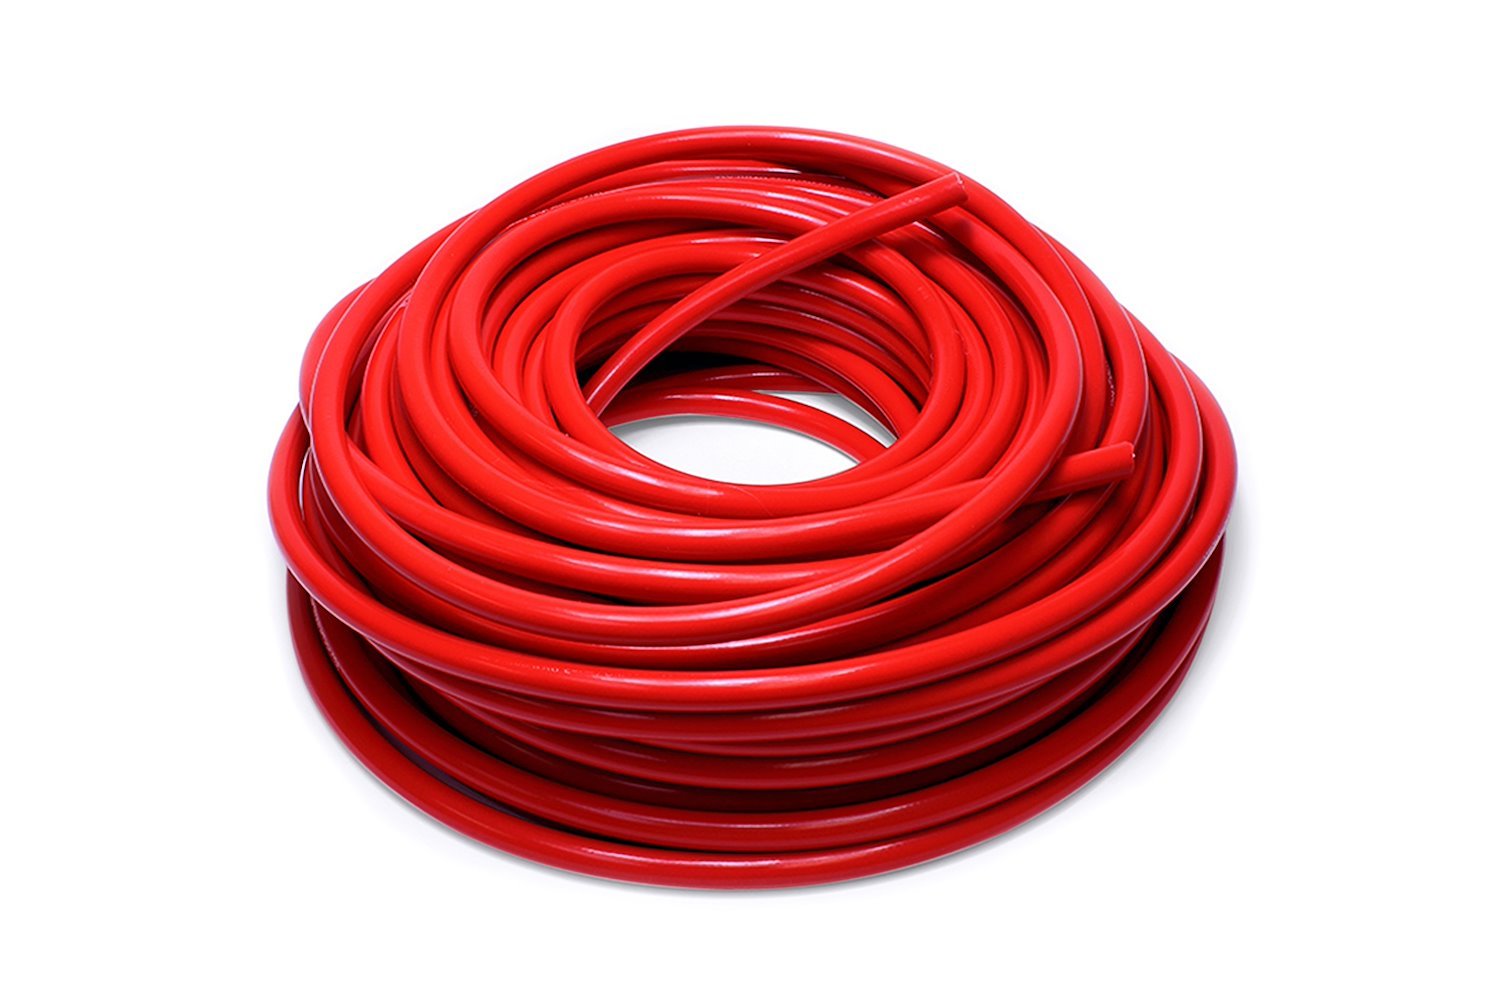 HTHH-016-REDx25 Silicone Heater Hose Tubing, High-Temp Reinforced, 5/32 in. ID, 25 ft. Roll, Red